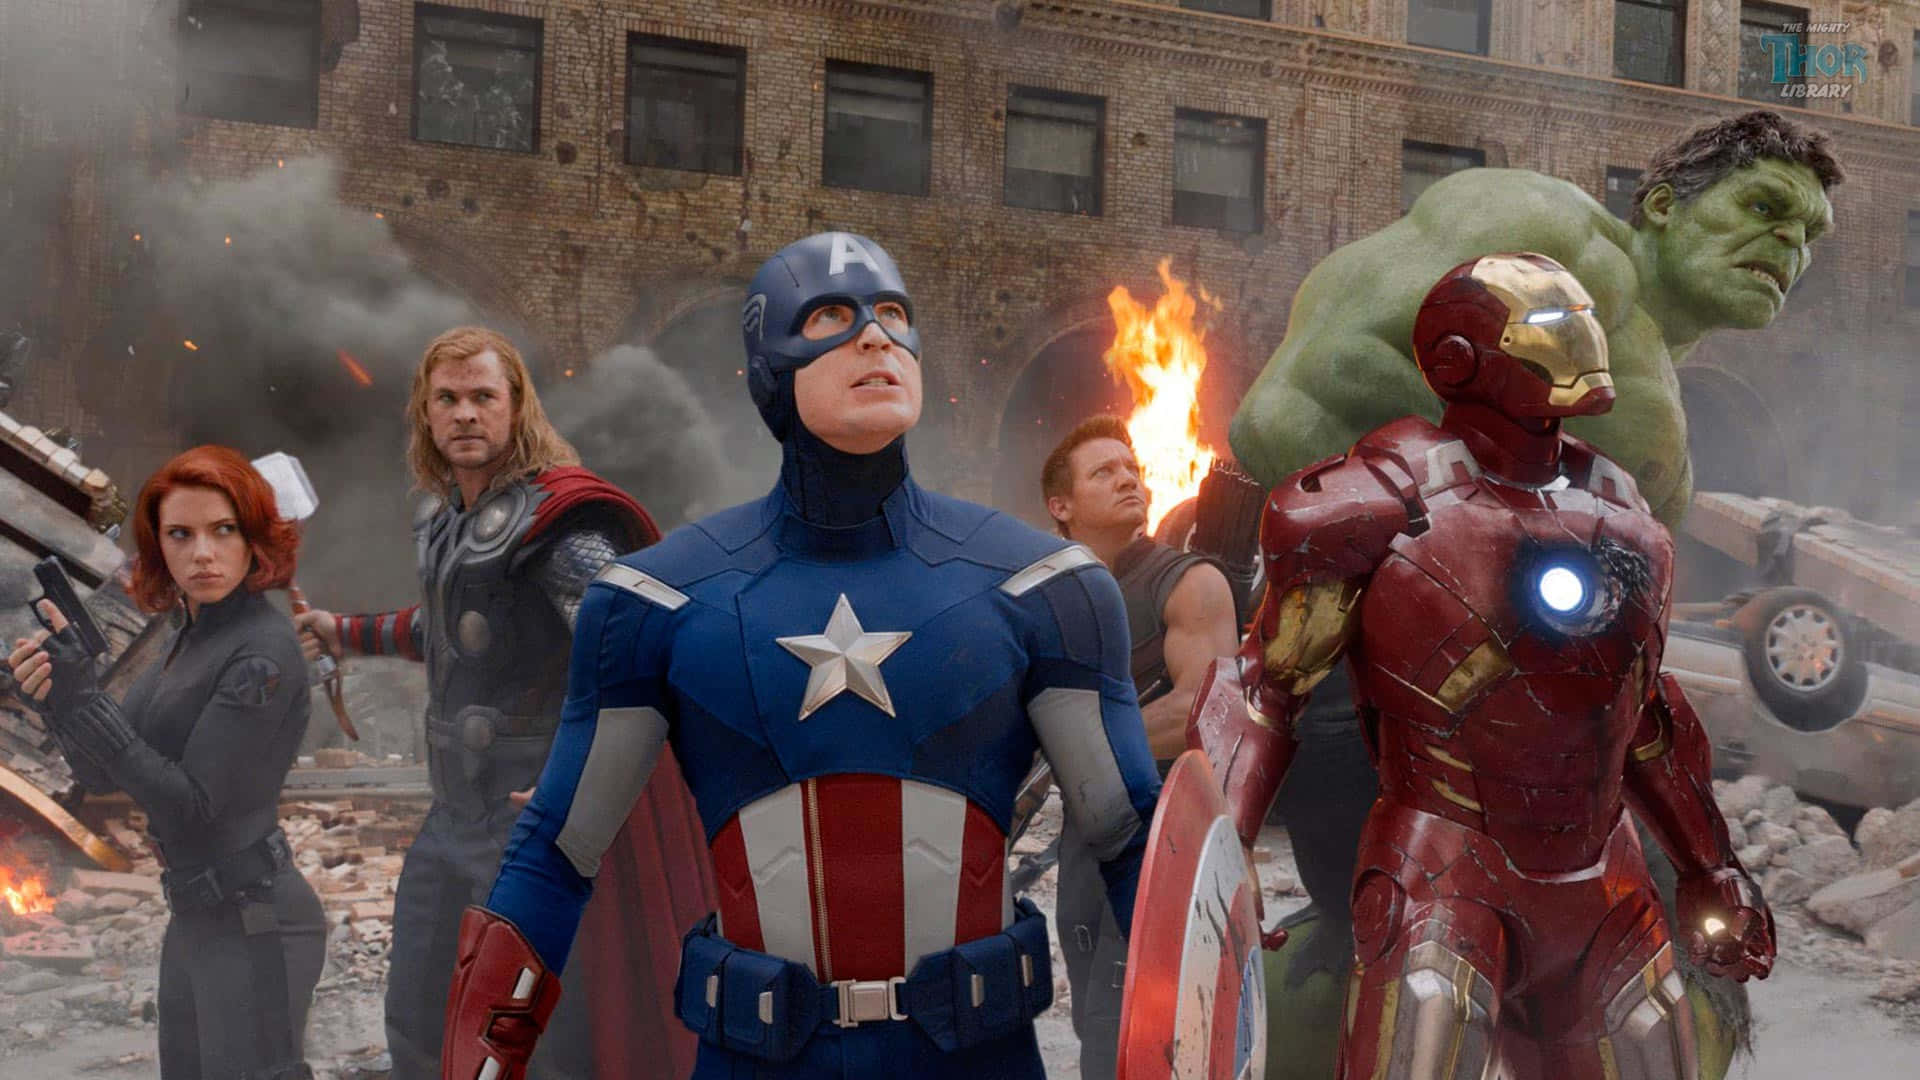 “Avenger Movie Characters Unite To Fight Evil” Wallpaper